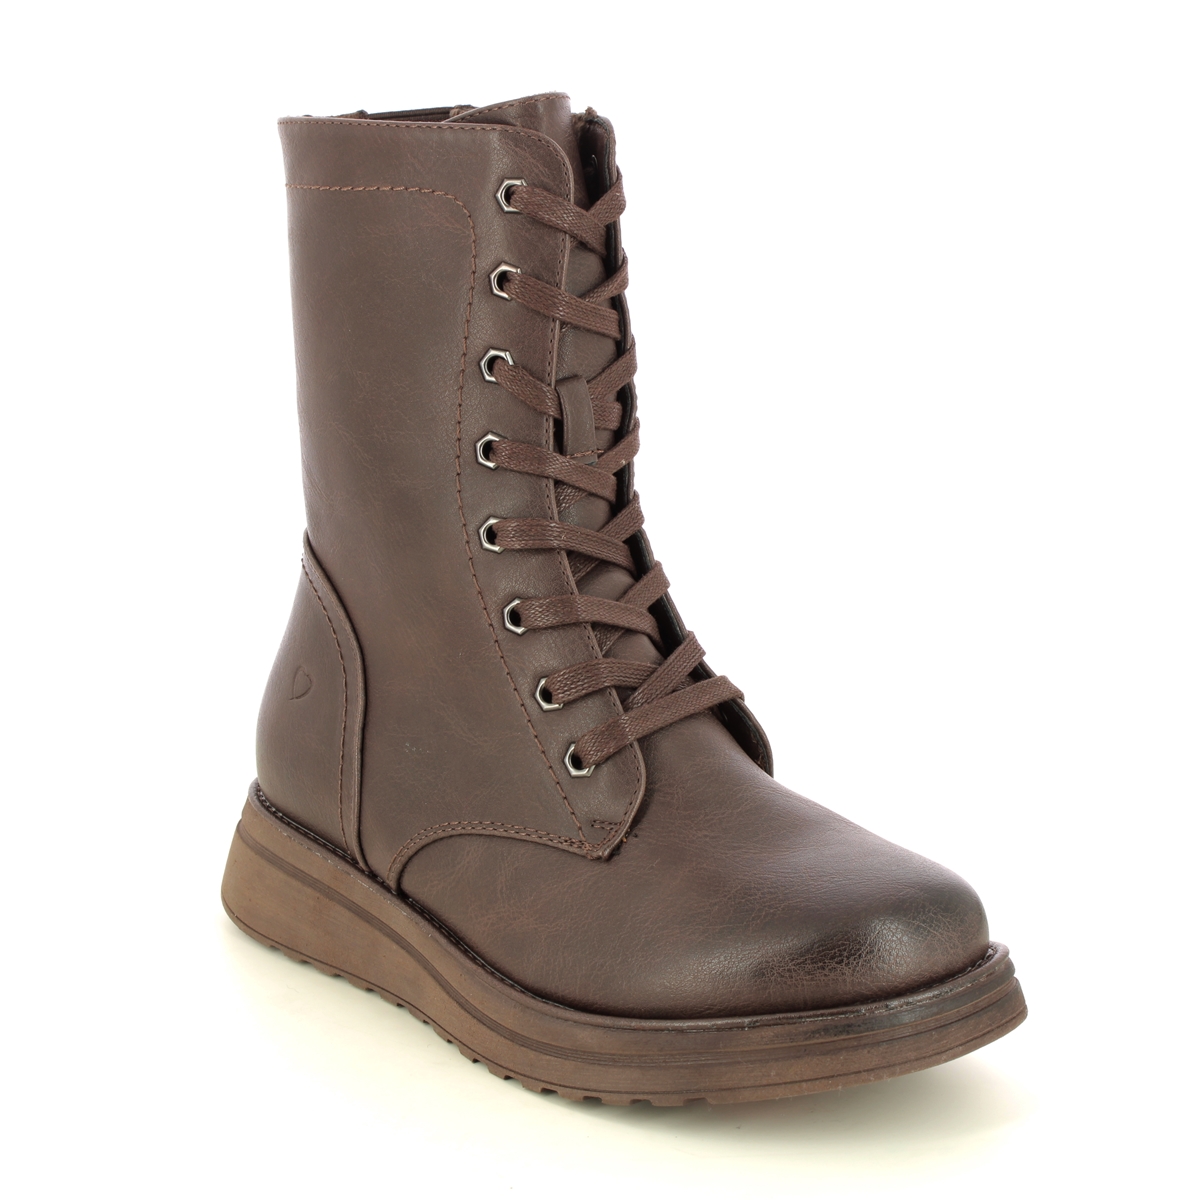 Heavenly Feet Martina Walker Chocolate Brown Womens Lace Up Boots 3509-27 In Size 8 In Plain Chocolate Brown